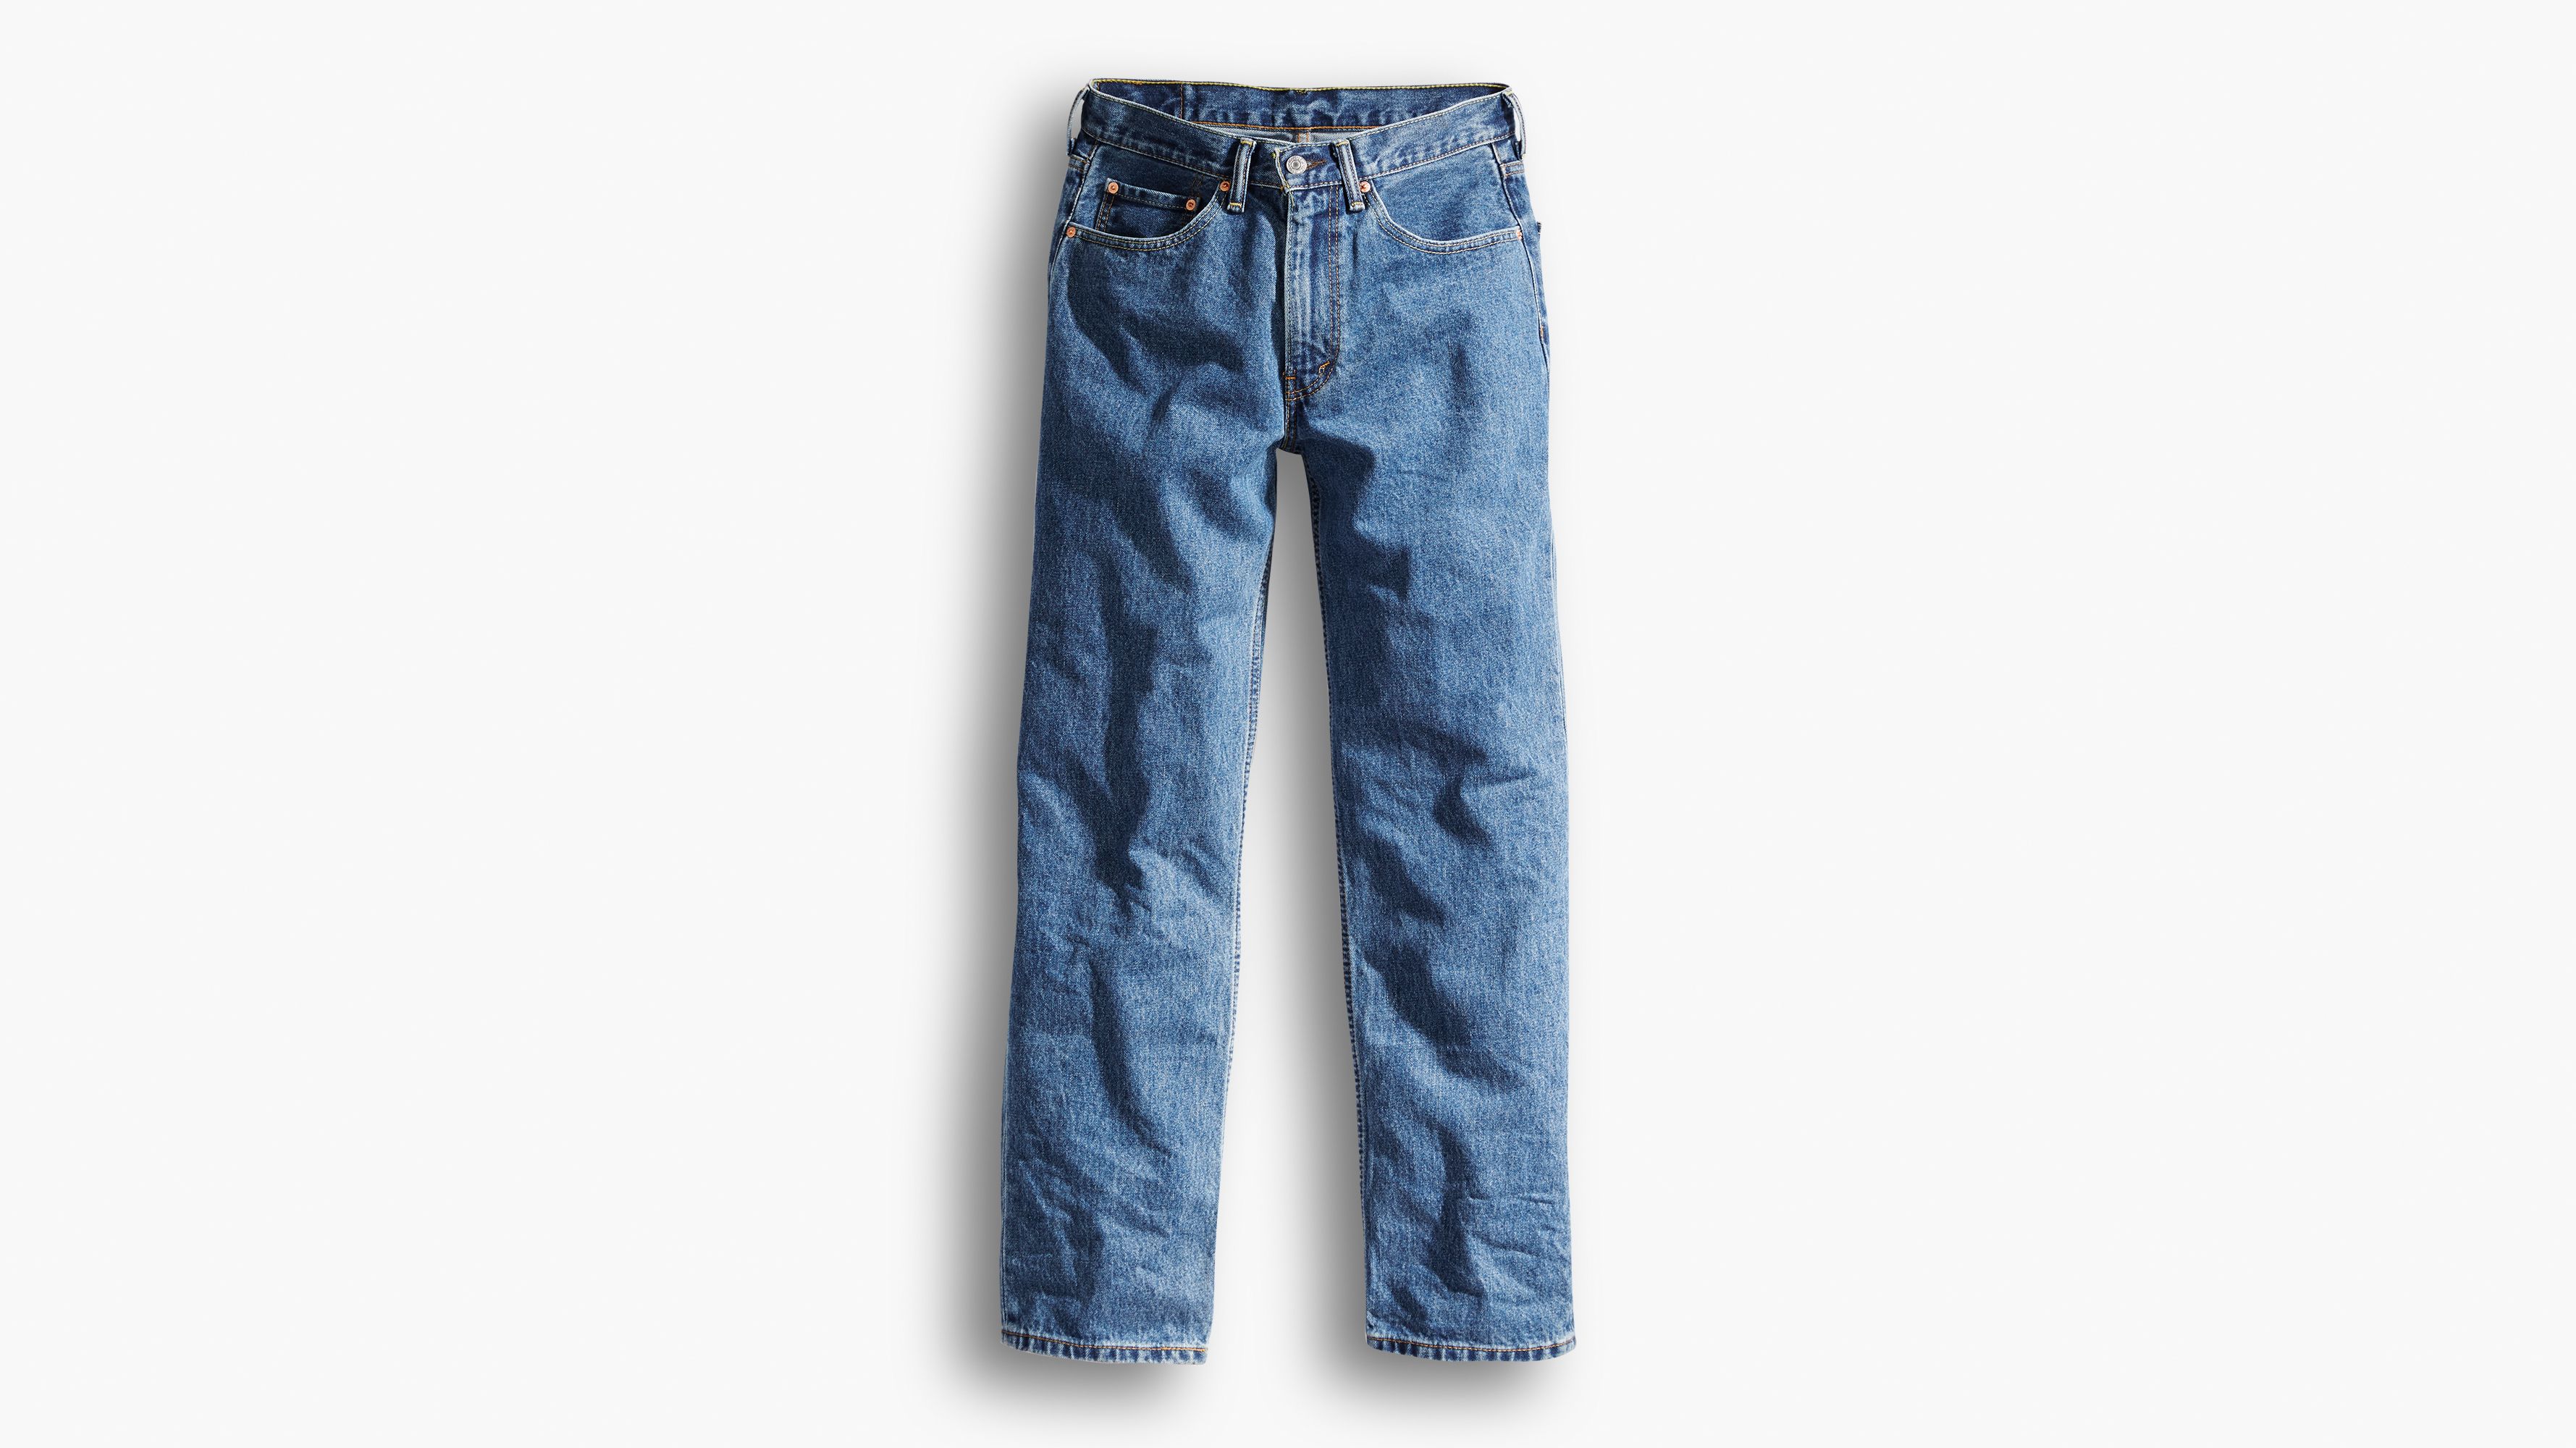 550™ Relaxed Fit Men's Jeans (big & Tall) - Medium Wash | Levi's